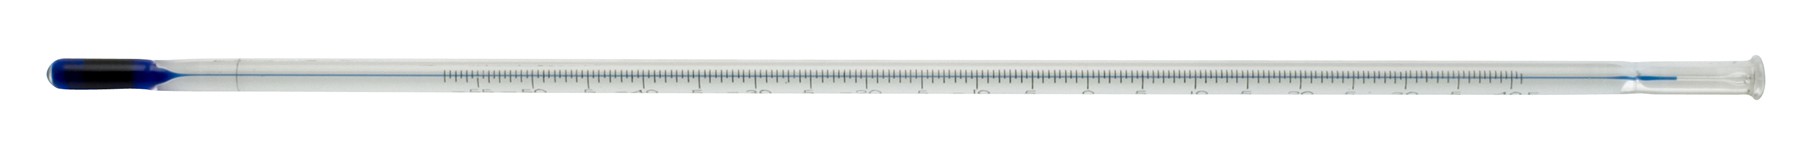 H-B DURAC Plus ASTM Like Liquid-In-Glass Thermometer; 1C / Partial Immersion 76mm, -20 to 150C, Organic Liquid Fill